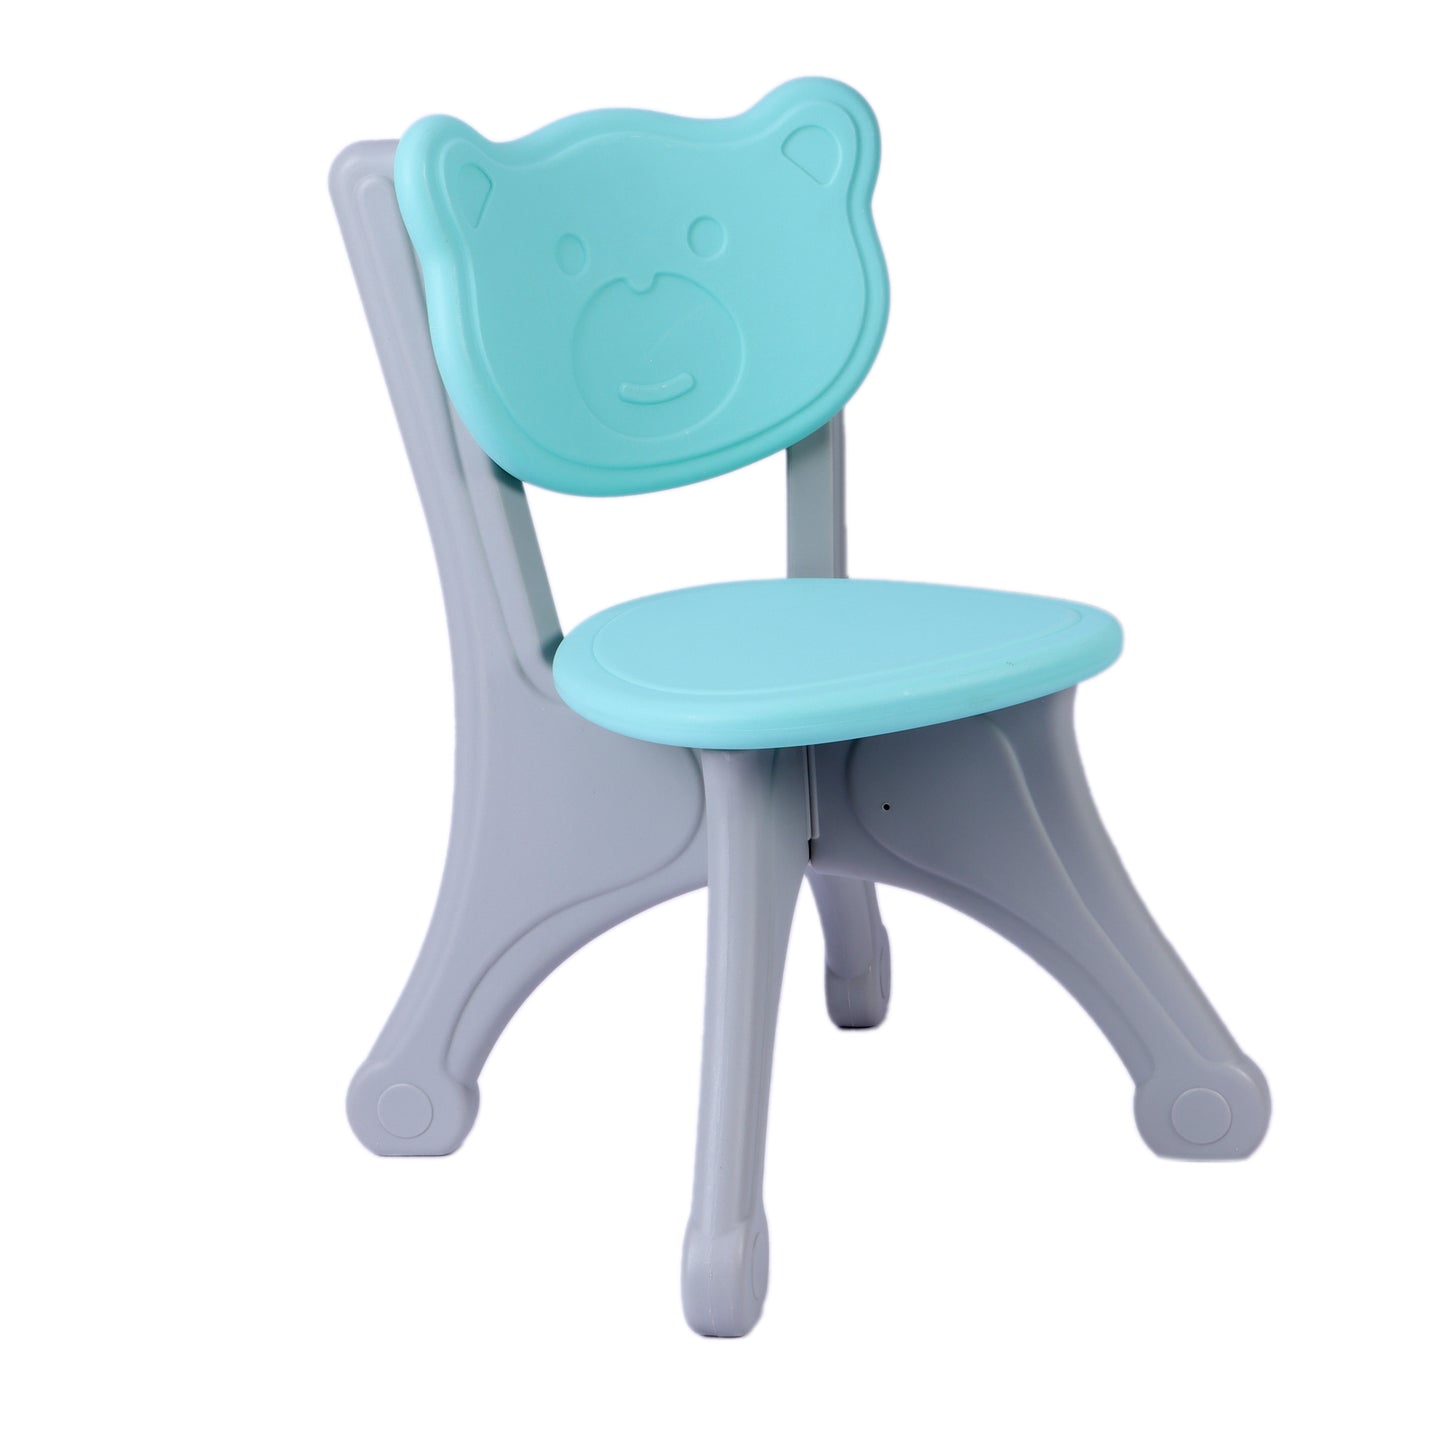 Table & Chair Set With Baskets Green (2-8 yrs)